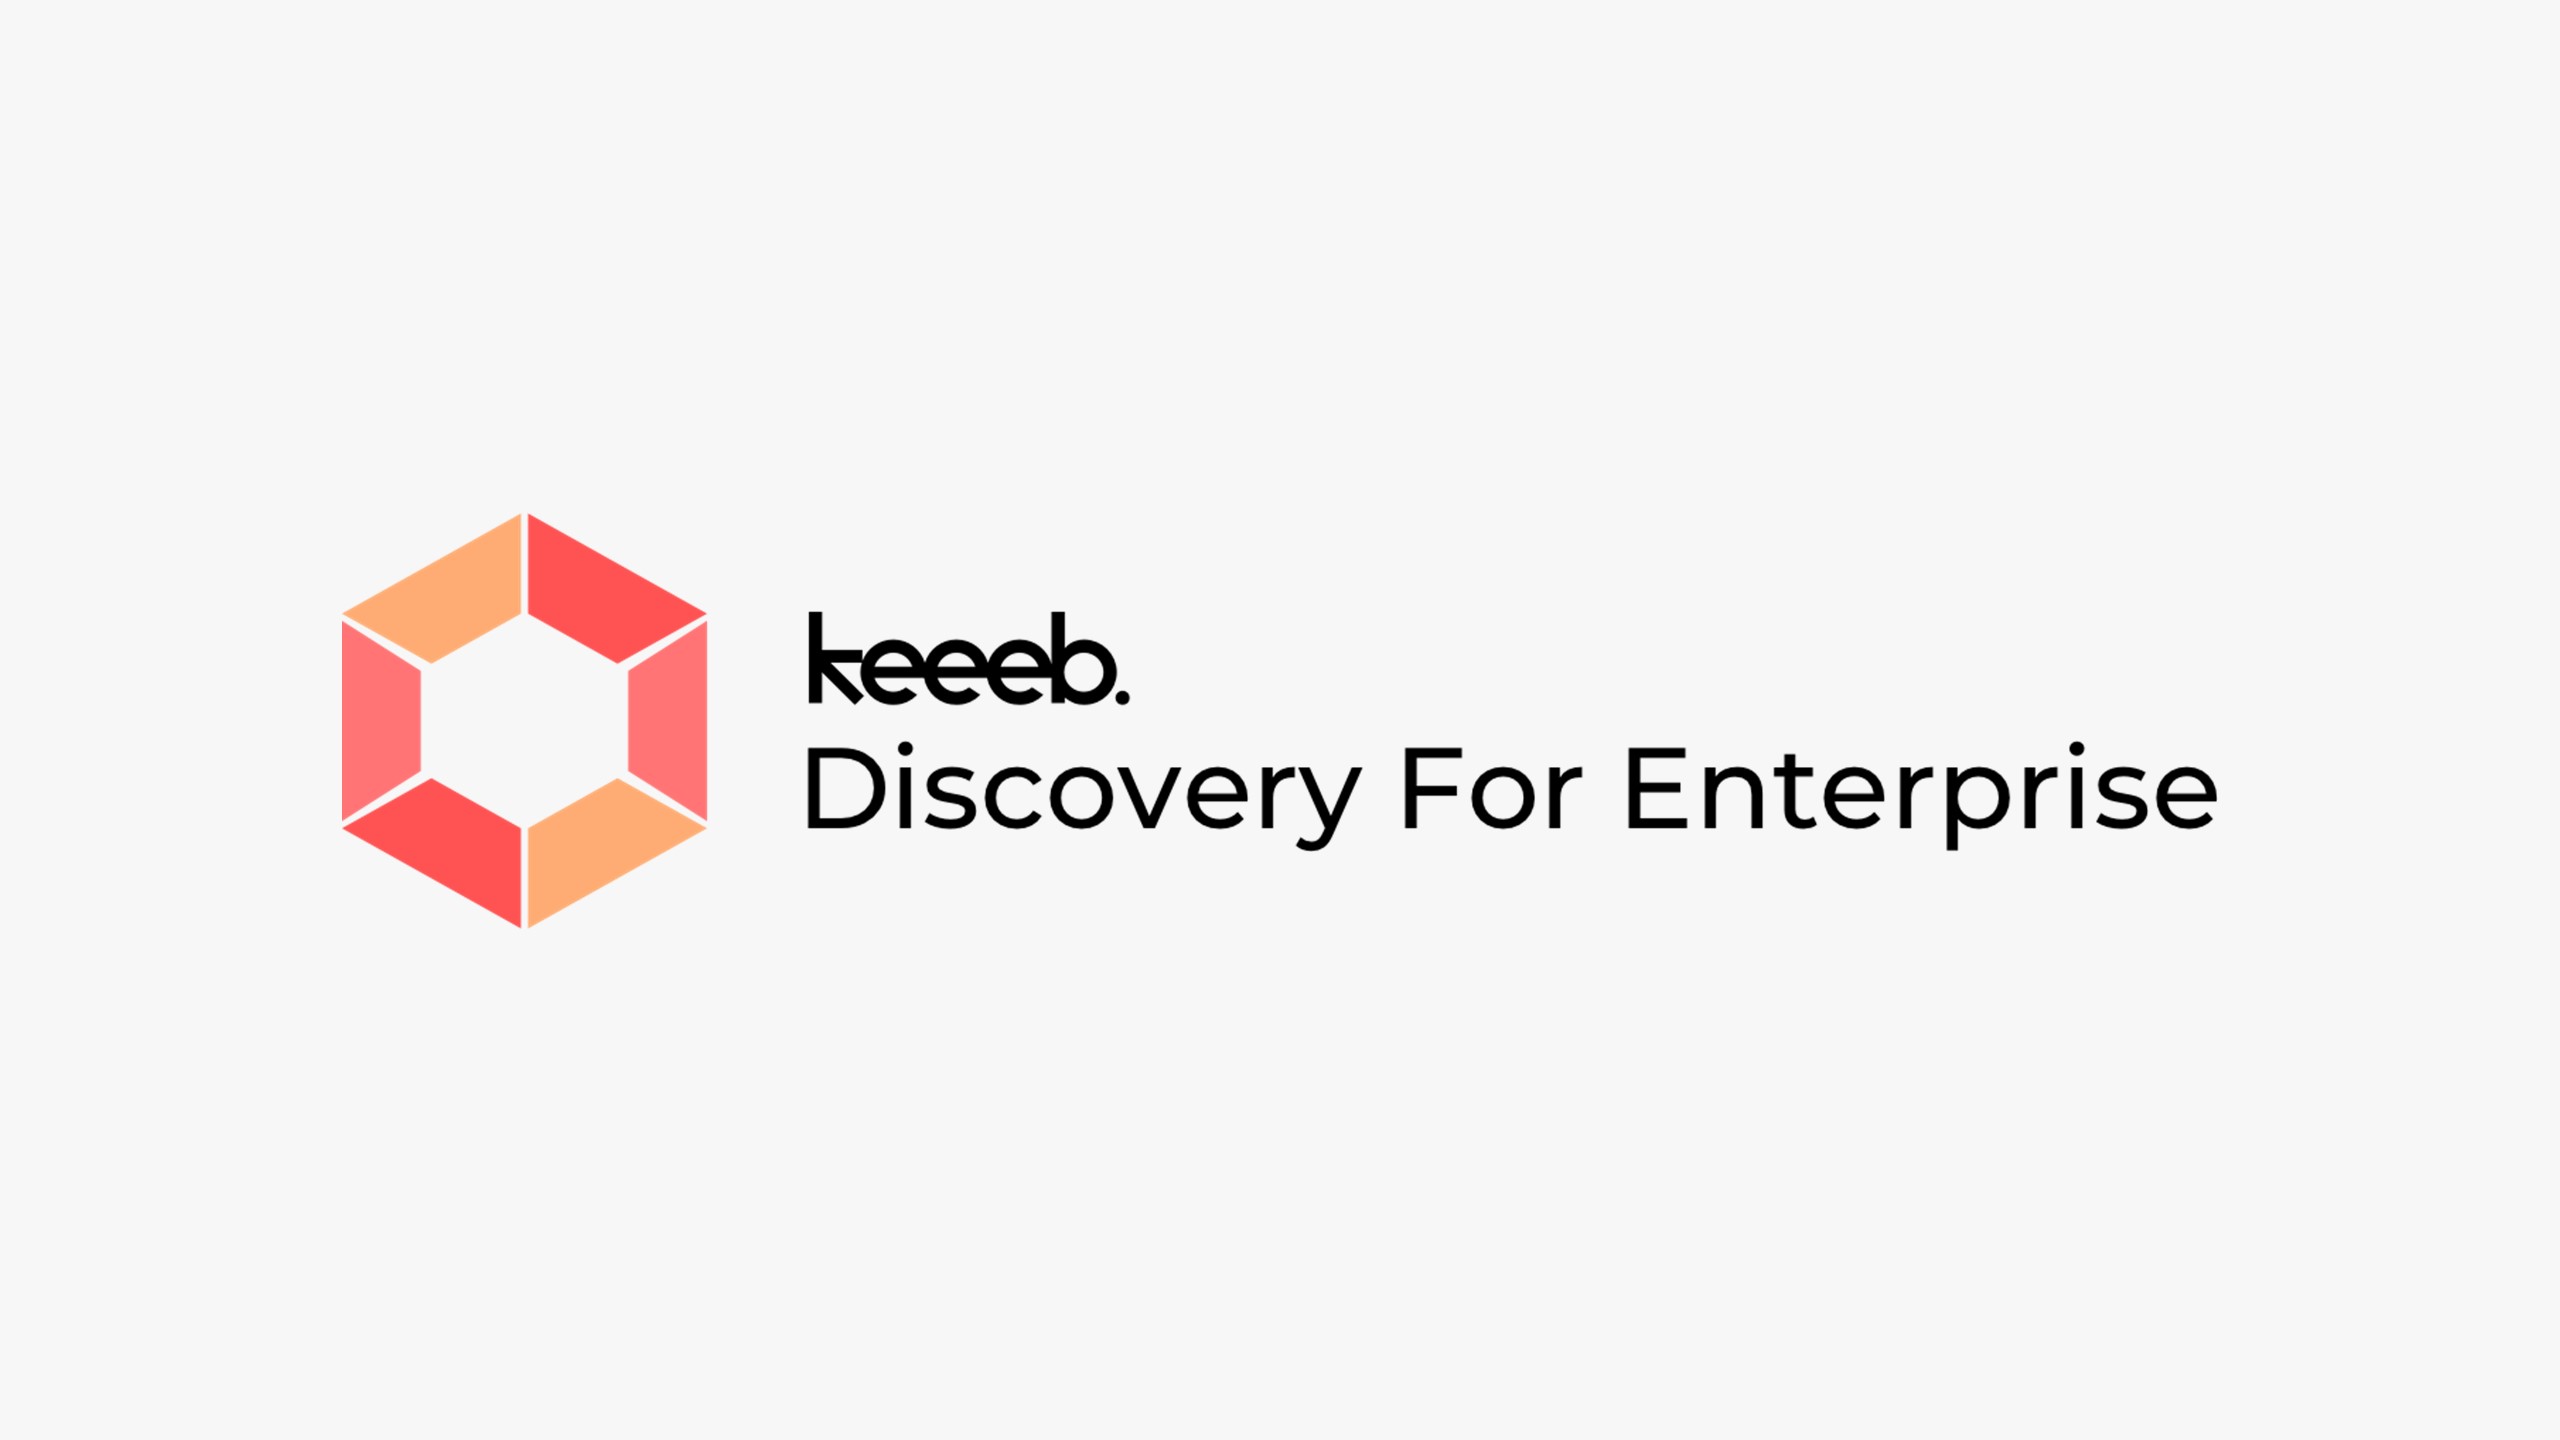 Keeeb Discovery For Enterprise